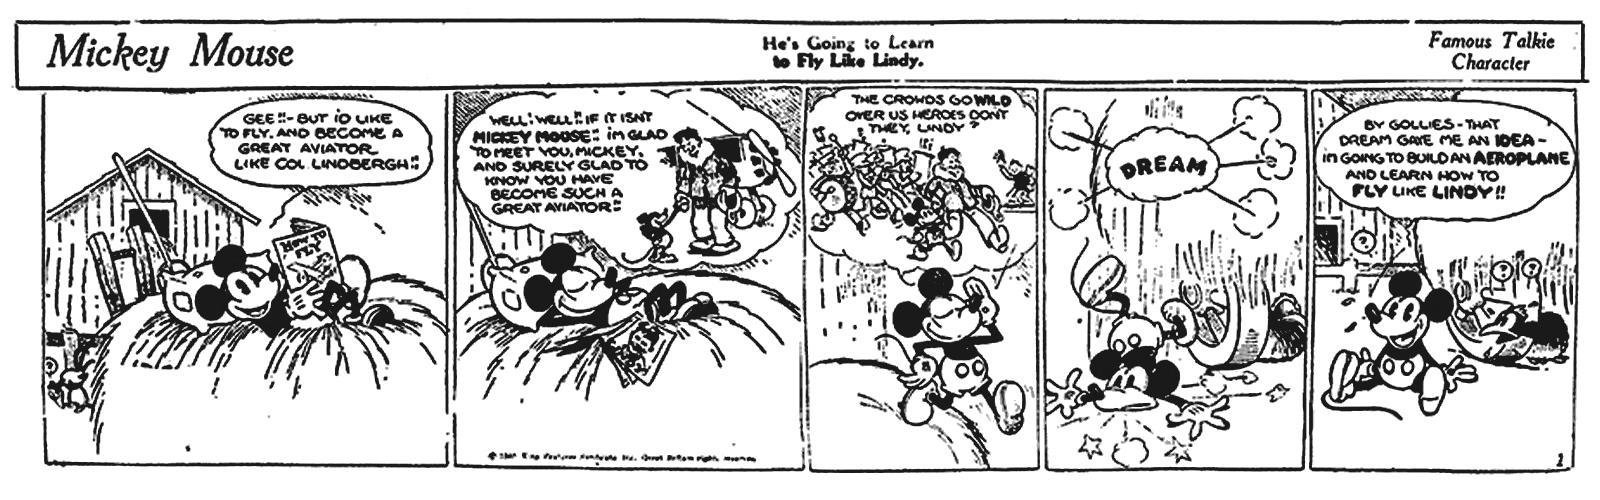 One of the first storyboards used by Walt Disney in the 1930s